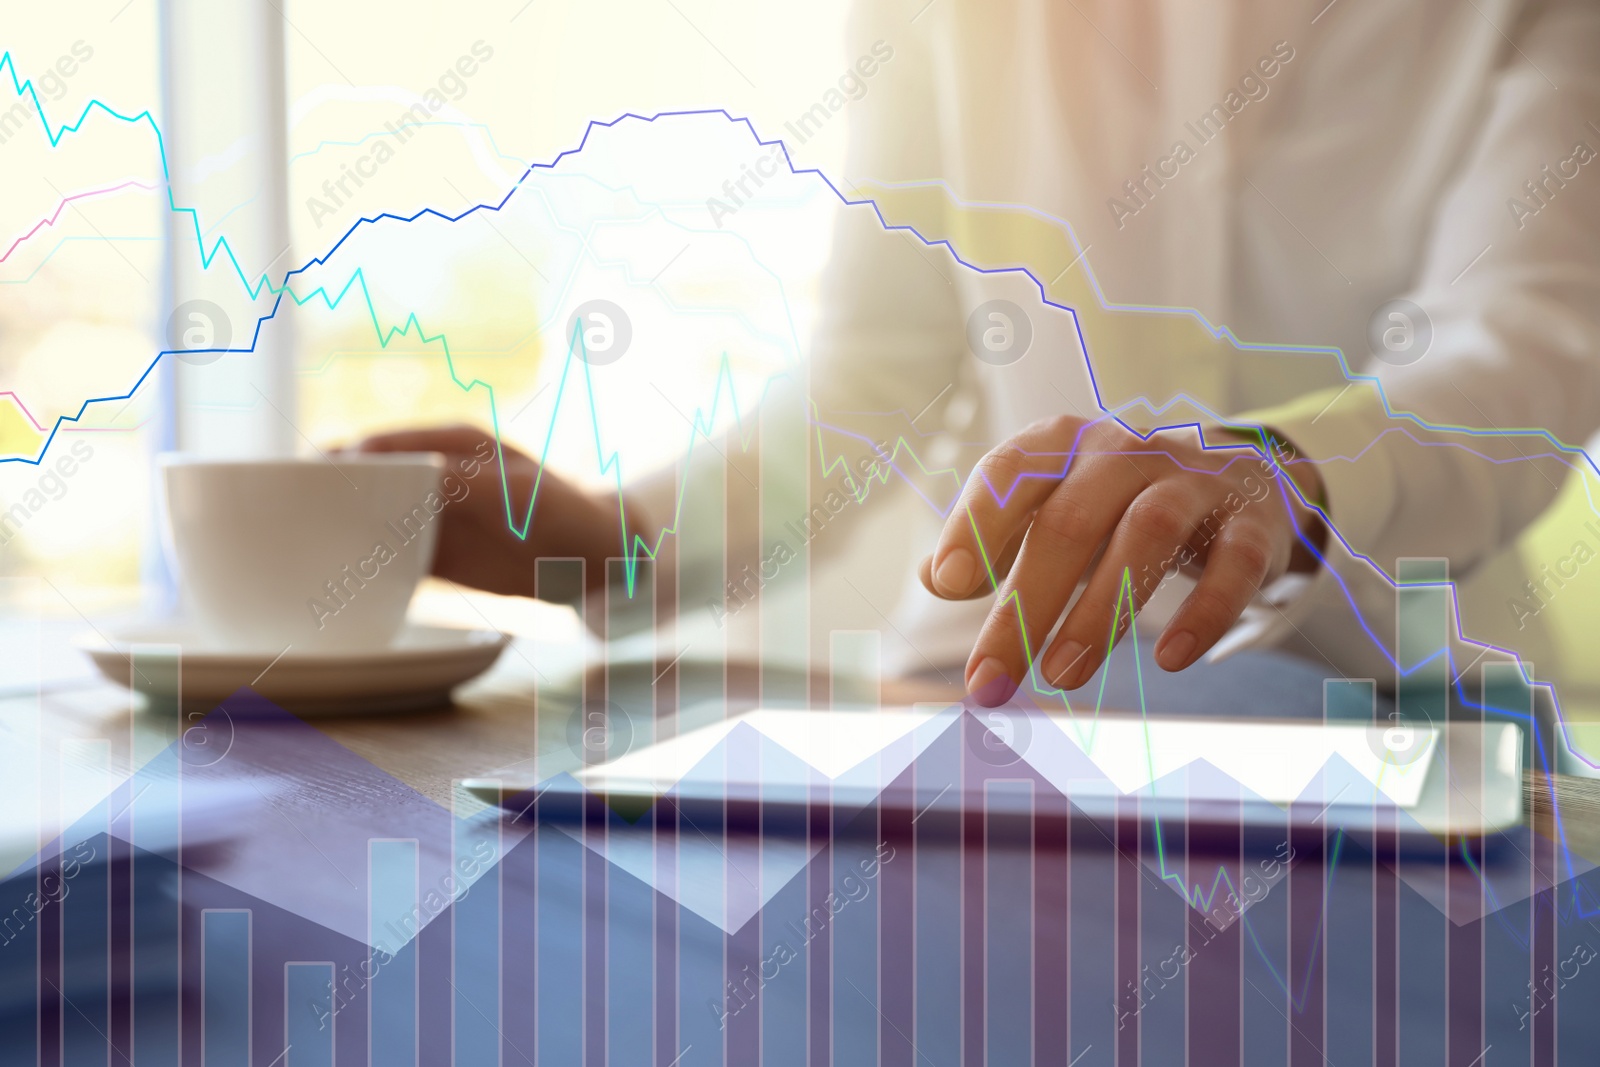 Image of Forex trading. Double exposure of charts and woman using tablet computer, closeup